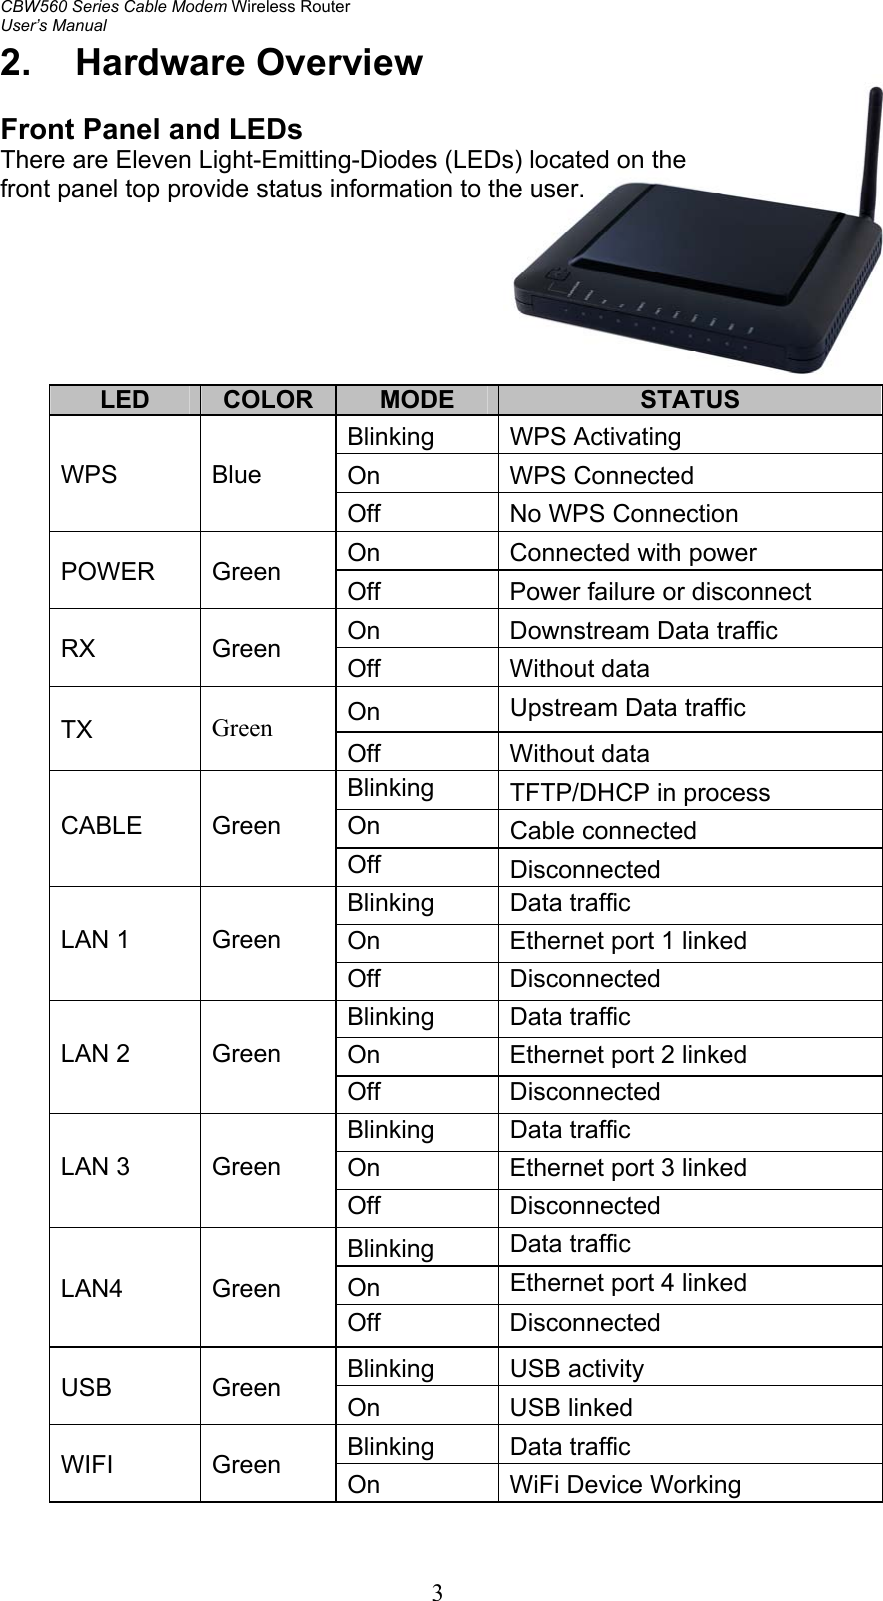 CBW560 Series Cable Modem Wireless Router User’s Manual   32. Hardware Overview  Front Panel and LEDs There are Eleven Light-Emitting-Diodes (LEDs) located on the  front panel top provide status information to the user.         LED  COLOR  MODE  STATUS Blinking  WPS Activating  On  WPS Connected  WPS Blue Off  No WPS Connection  On Connected with power POWER Green  Off  Power failure or disconnect On  Downstream Data traffic RX Green Off Without data On  Upstream Data traffic TX  Green Off Without data Blinking  TFTP/DHCP in process On  Cable connected CABLE Green Off  Disconnected Blinking Data traffic On  Ethernet port 1 linked LAN 1  Green Off   Disconnected Blinking Data traffic On  Ethernet port 2 linked LAN 2  Green Off   Disconnected Blinking Data traffic On  Ethernet port 3 linked LAN 3  Green Off   Disconnected Blinking  Data traffic On  Ethernet port 4 linked LAN4 Green Off   Disconnected Blinking USB activity USB Green On USB linked Blinking Data traffic WIFI Green On   WiFi Device Working      